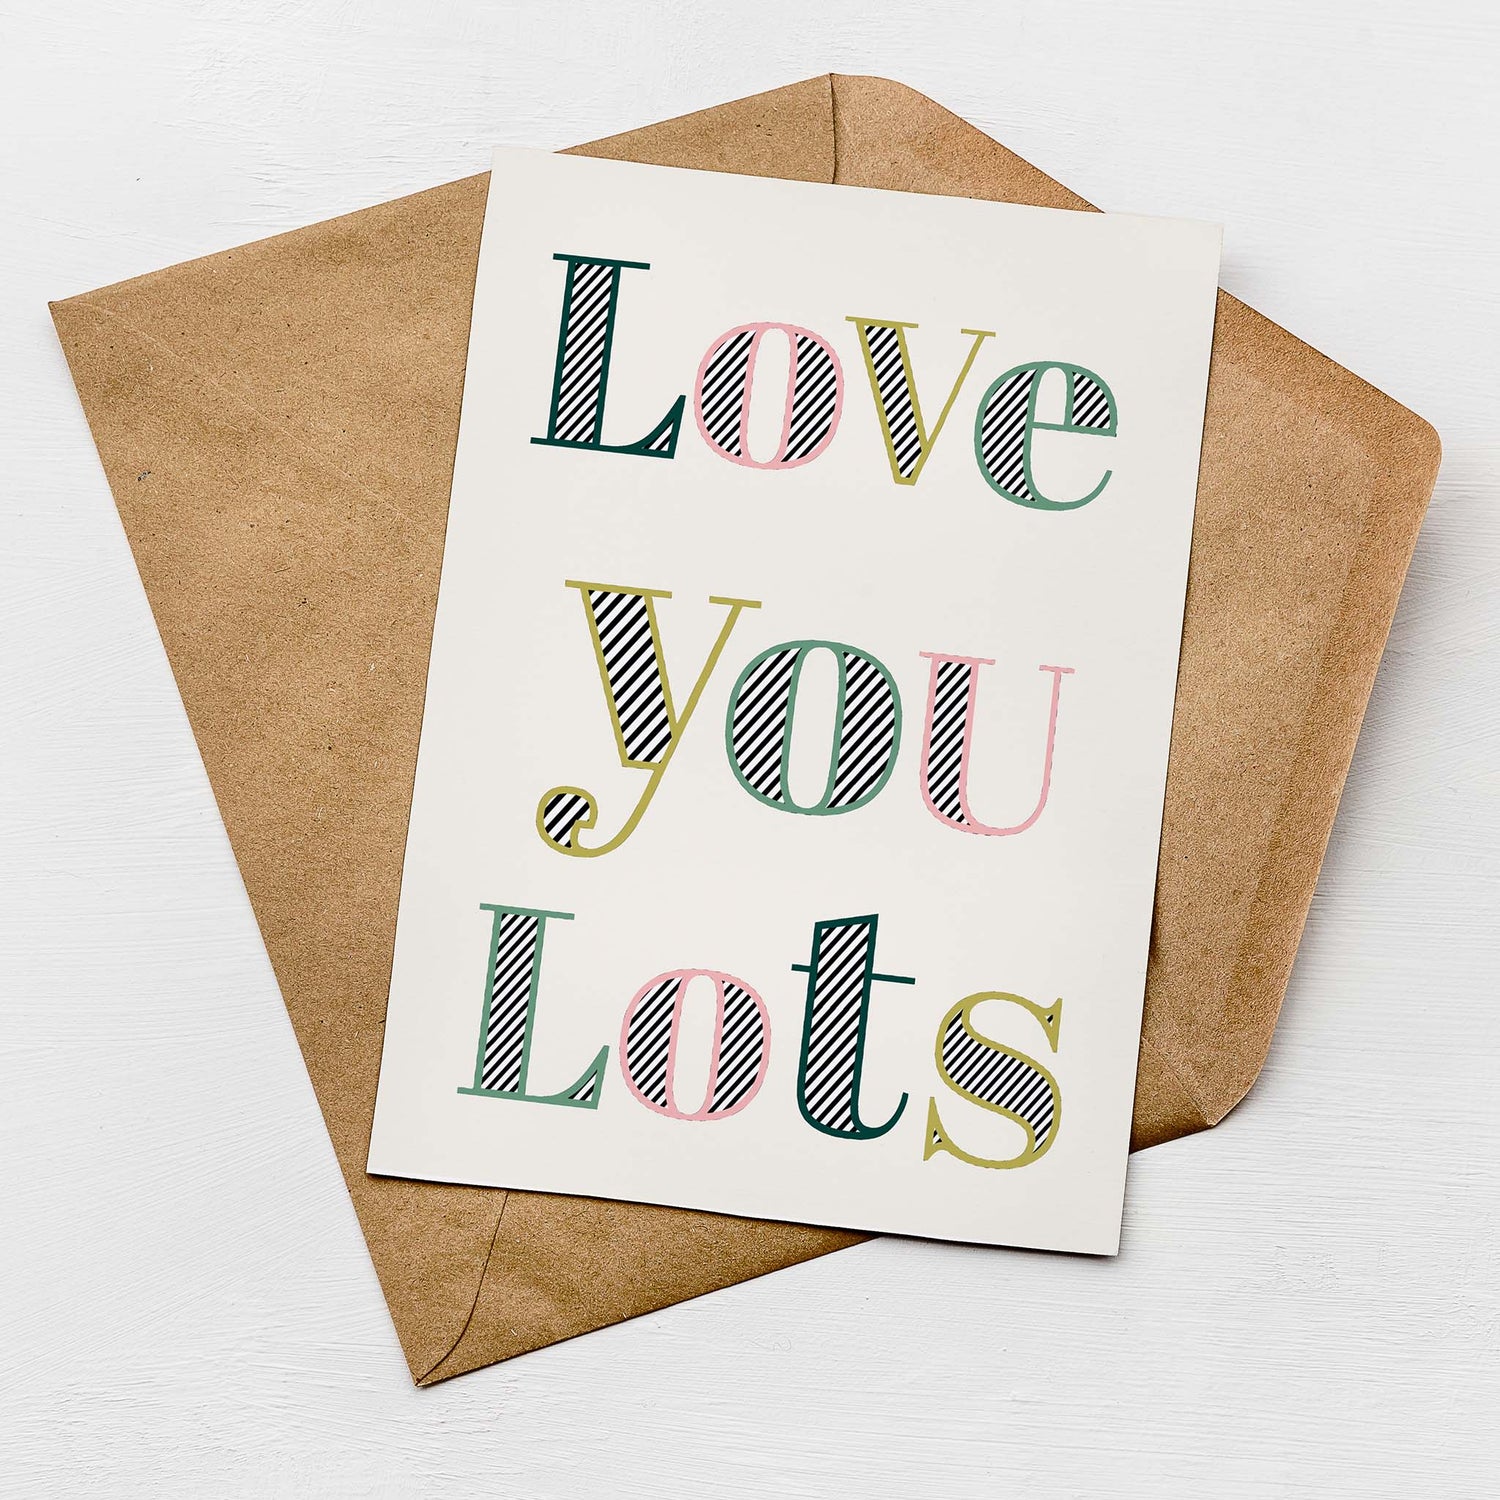 What's New? |. Modern Greetings Card by Greenwich Paper Studio